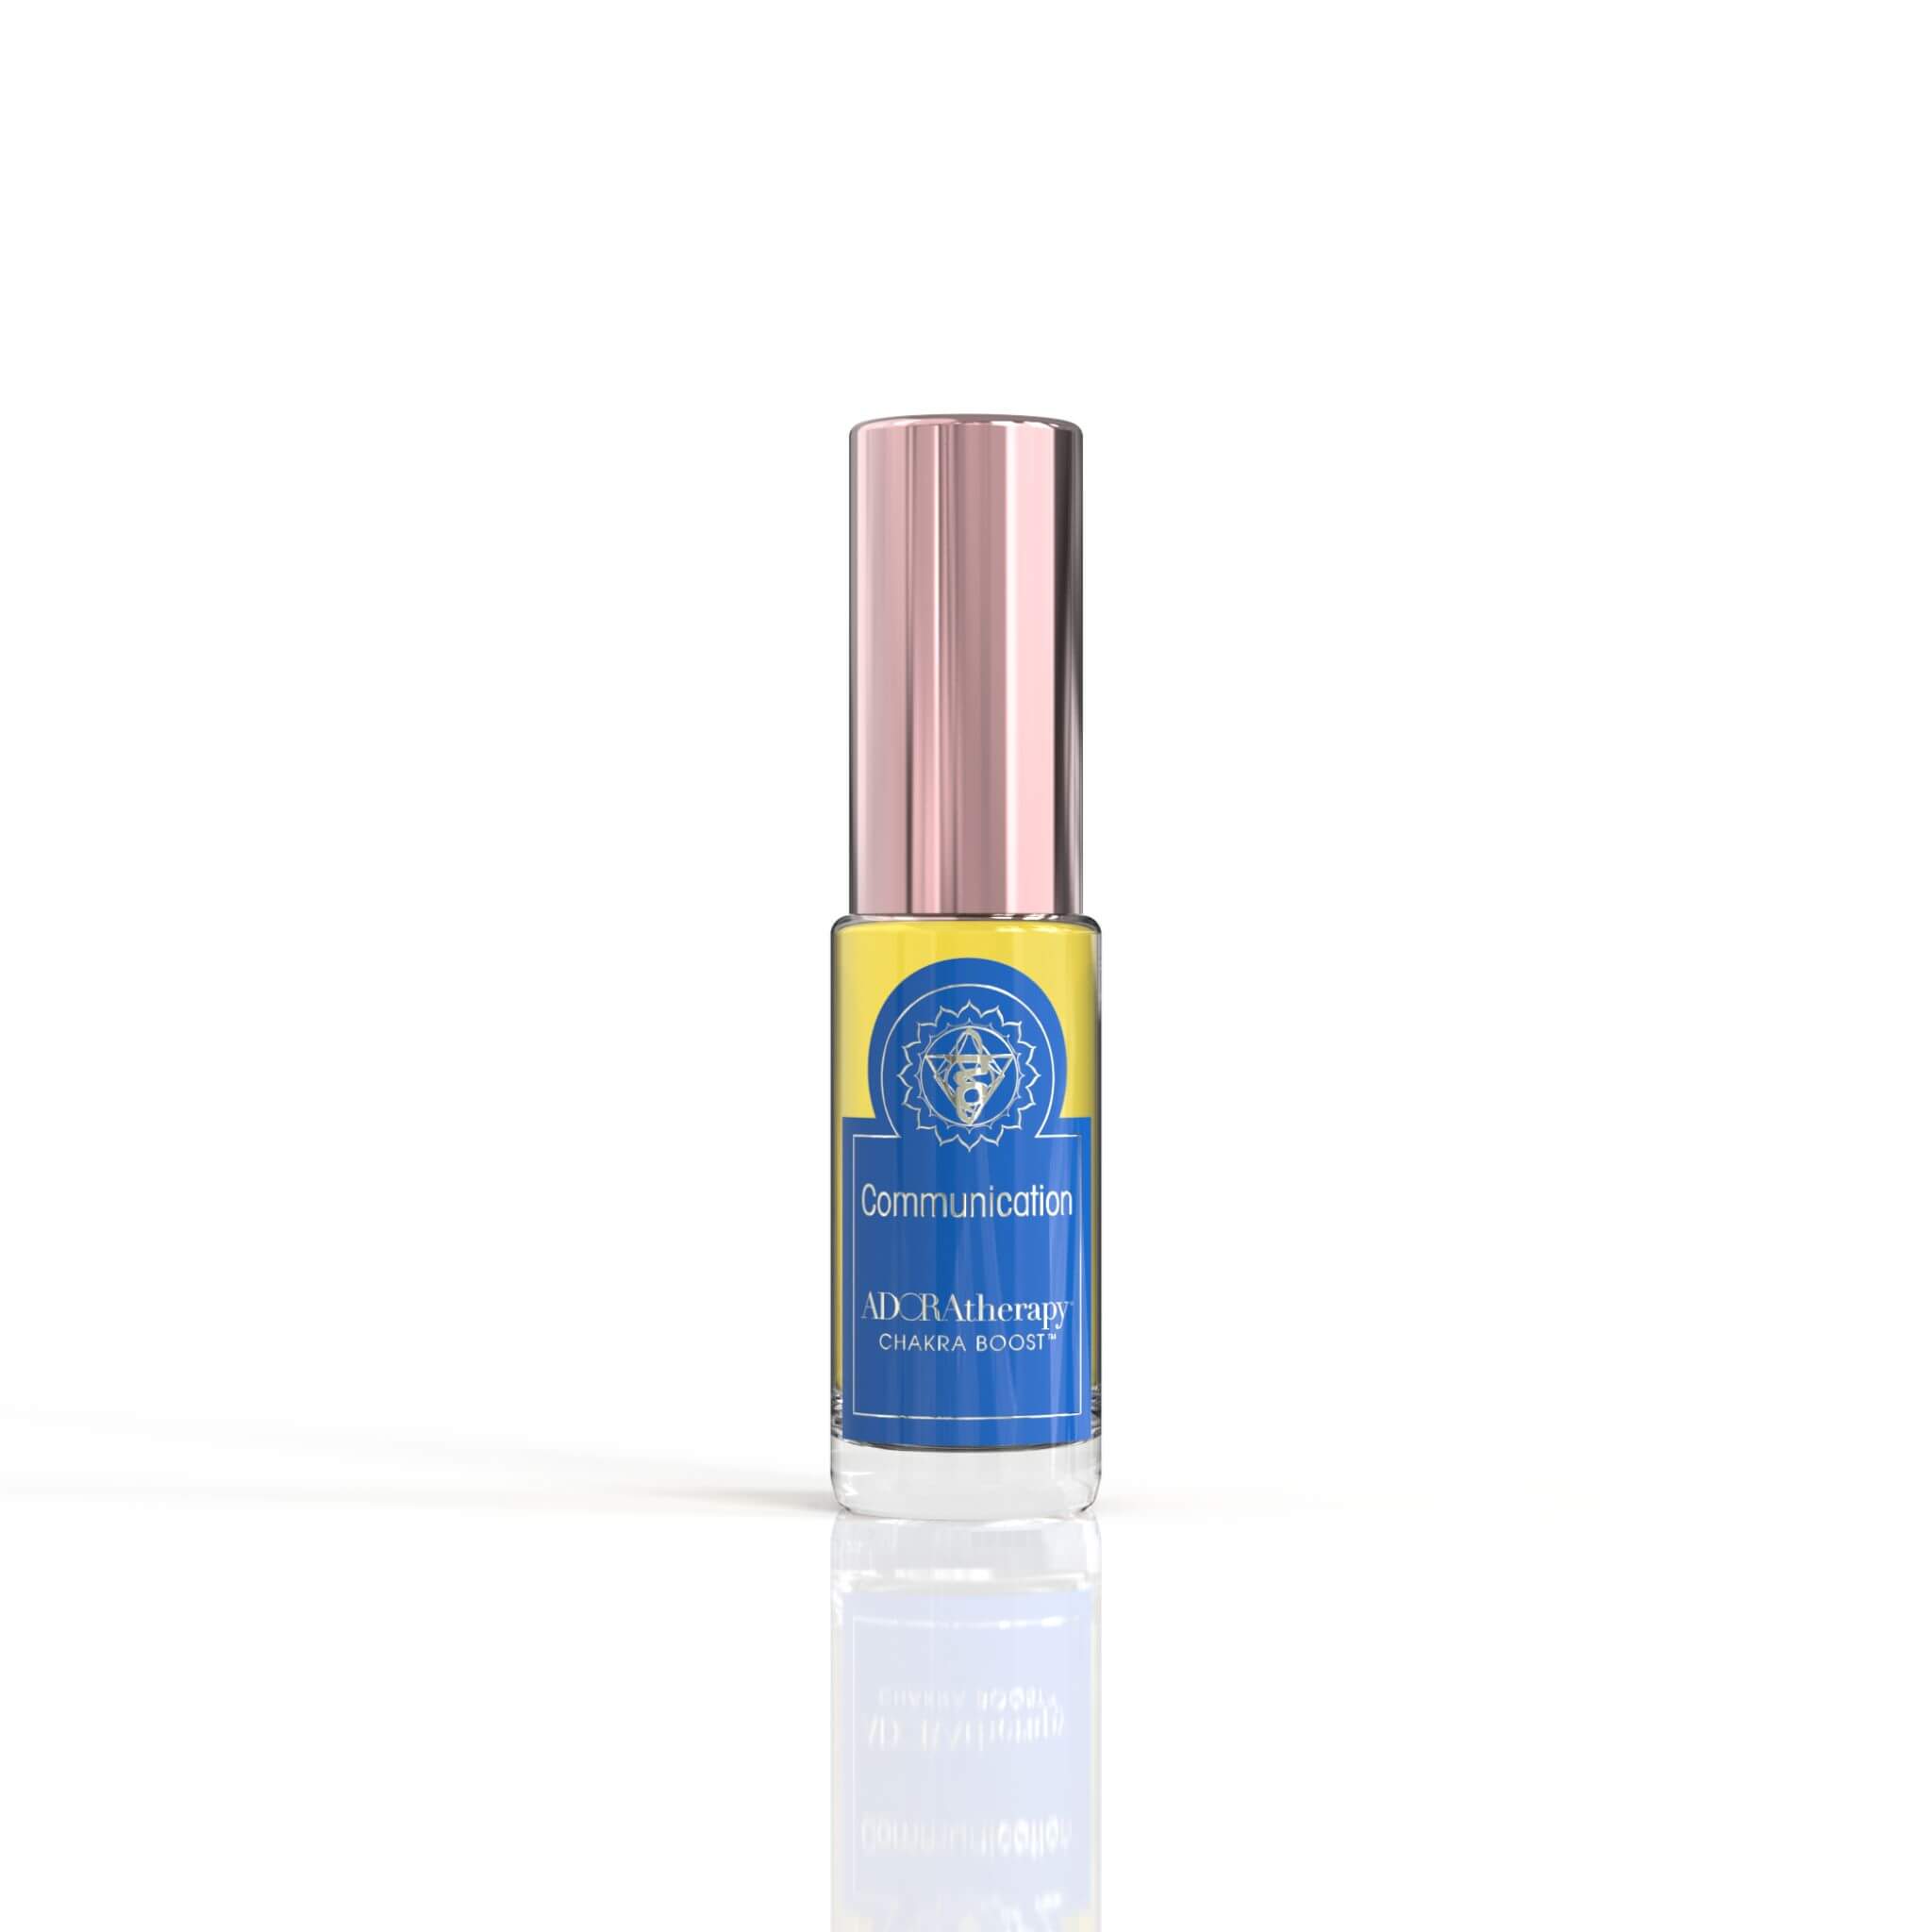 Chakra 5 Communication Roll On Perfume Oil by ADORAtherapy